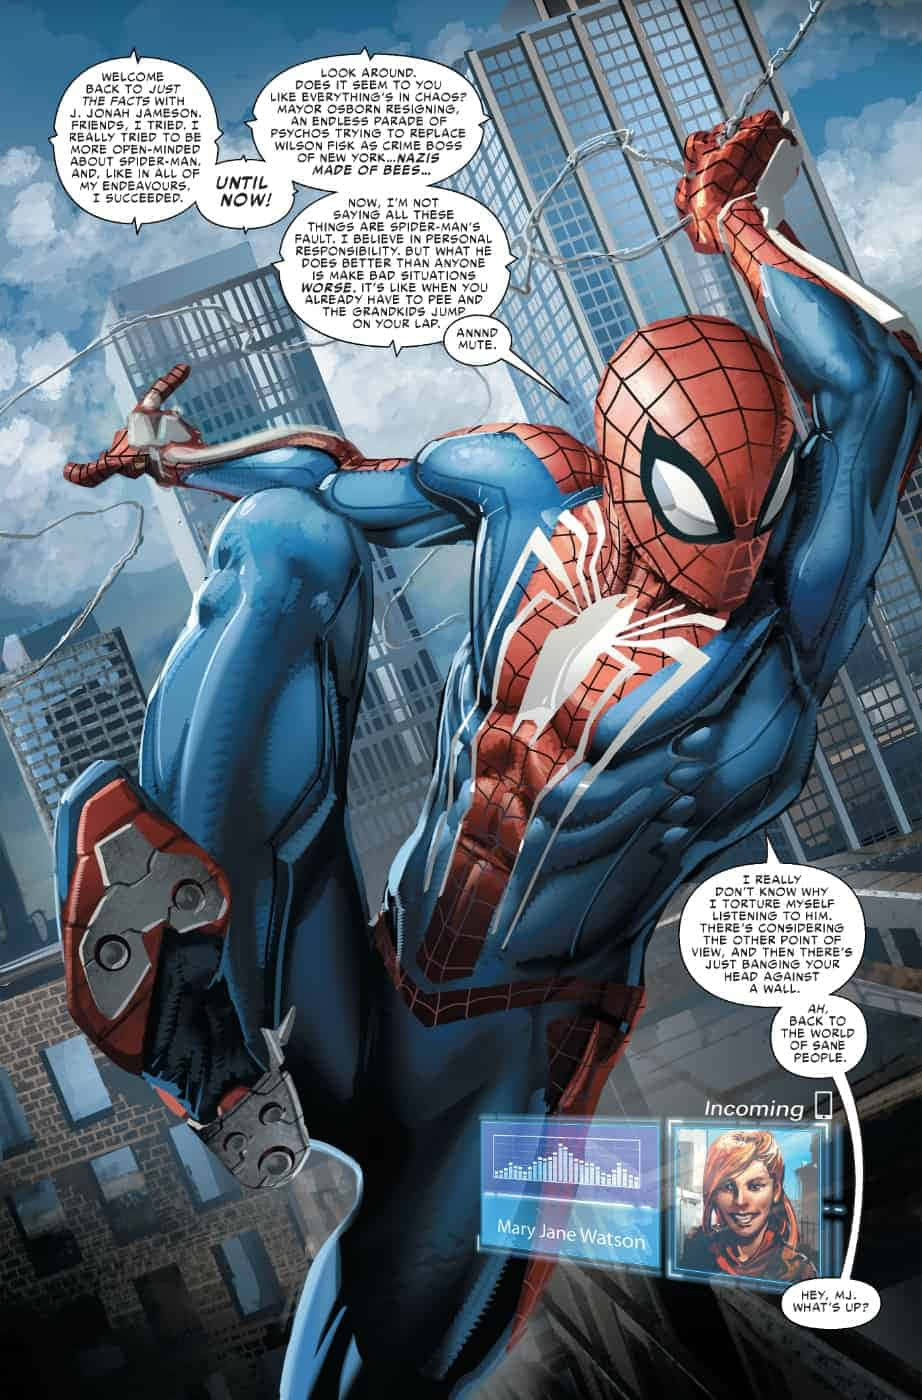 Spider-Geddon Event featuring Multiverse Spider-Man Characters Wallpaper